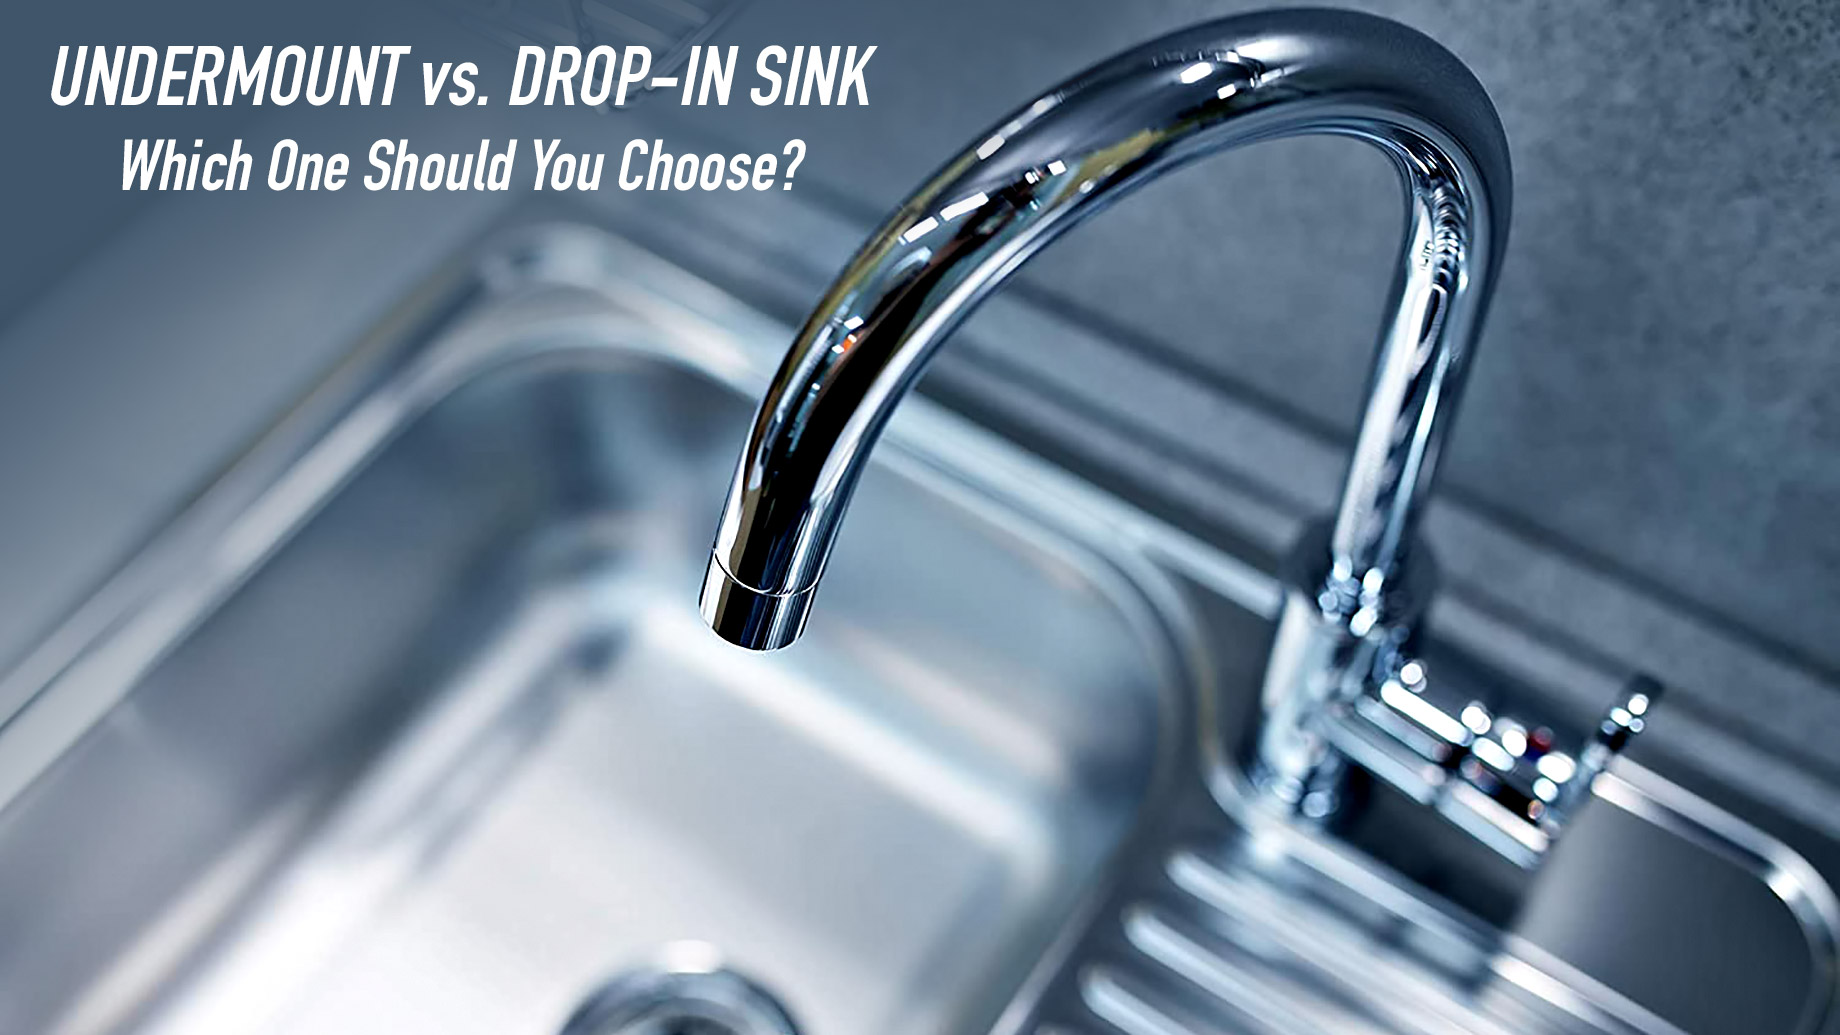 Undermount vs. Drop-In Sink - Which One Should You Choose?